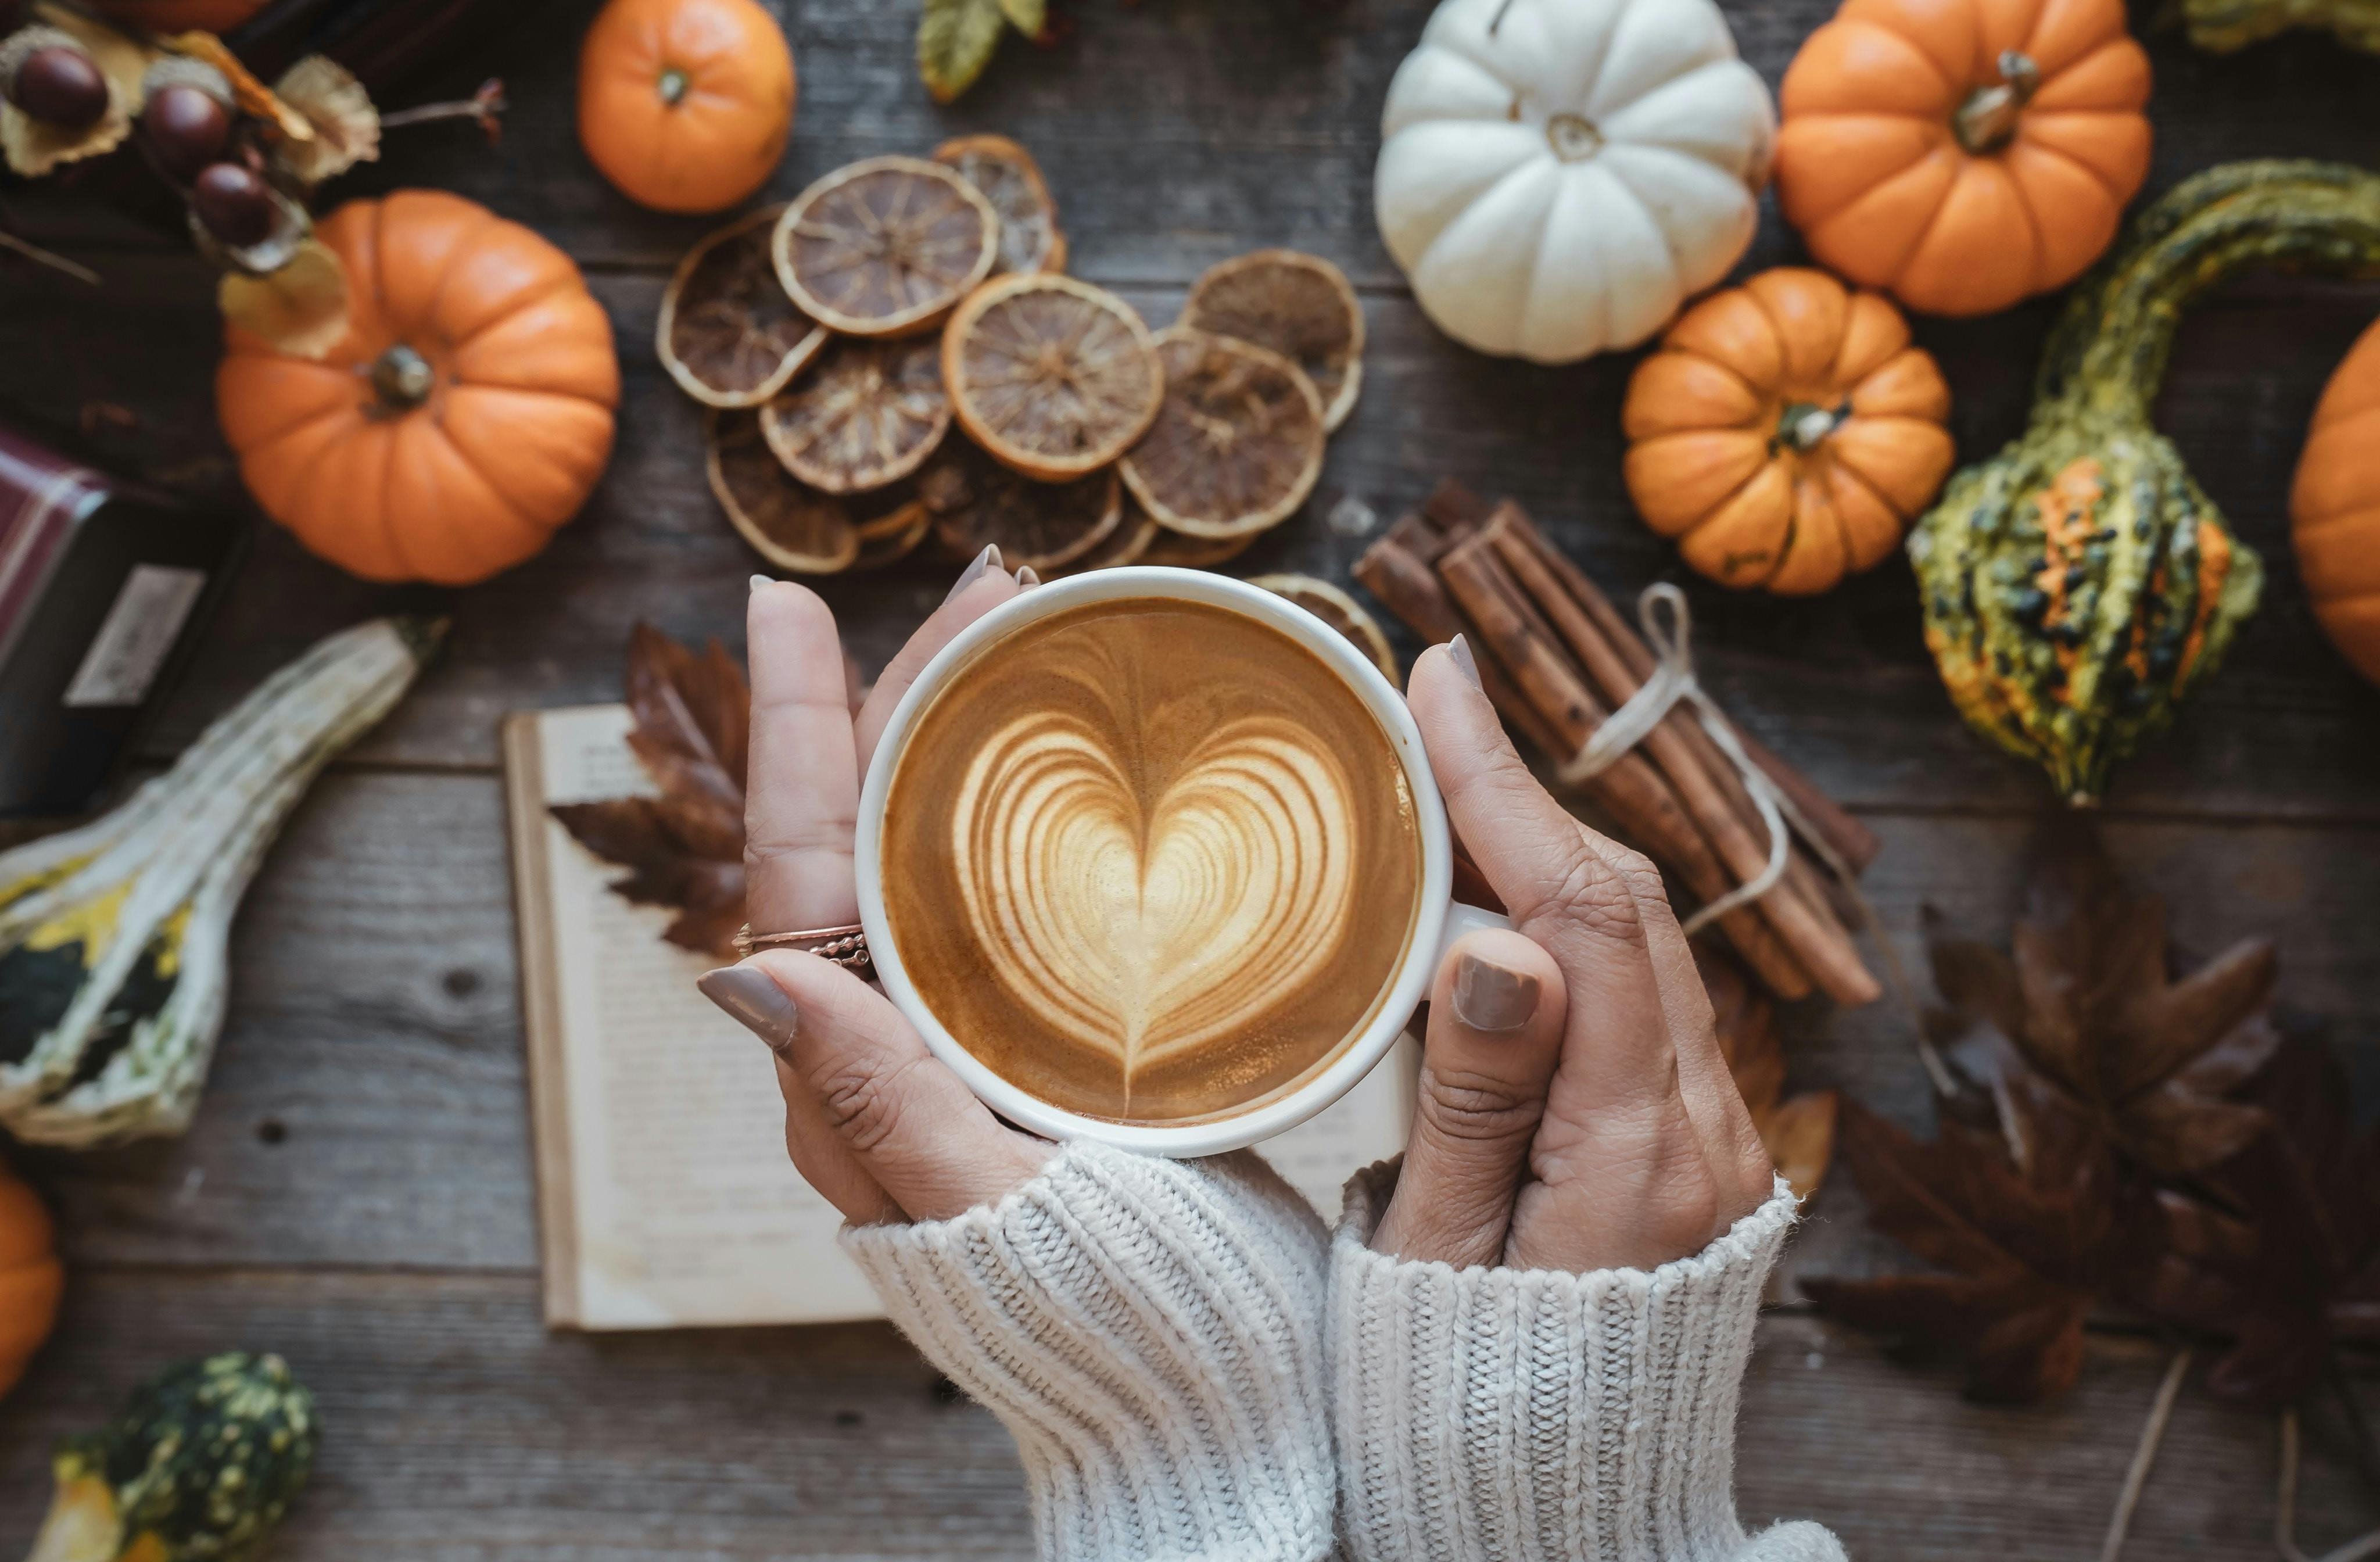 Image of a person's hands holding a coffee beverage with a the foam in a shape of a heart. The person is wearing a comfy white sweater (we only see their wrists & hands). Around them are miniature pumpkins, spices, squash, and leaves with an open book.